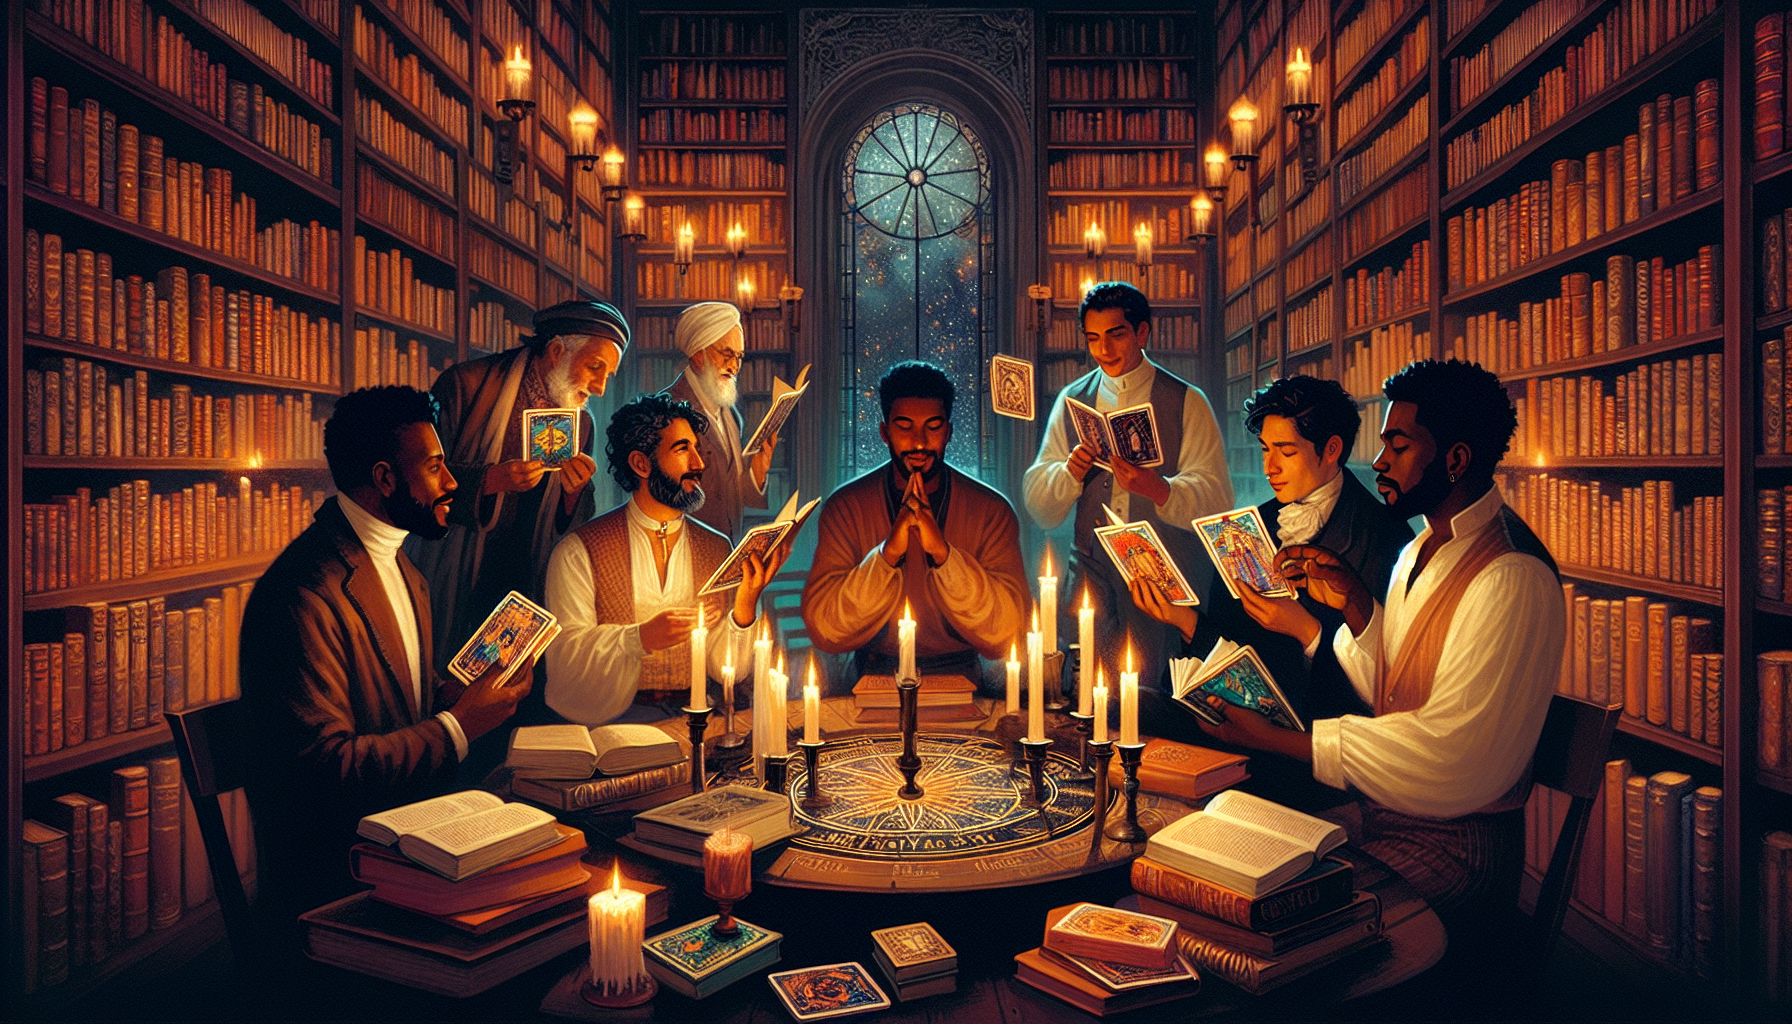 A cozy, mystical library with dim lighting, where a diverse group of five authors, each with a different cultural background, are discussing and holding beautifully illustrated tarot cards, surrounded